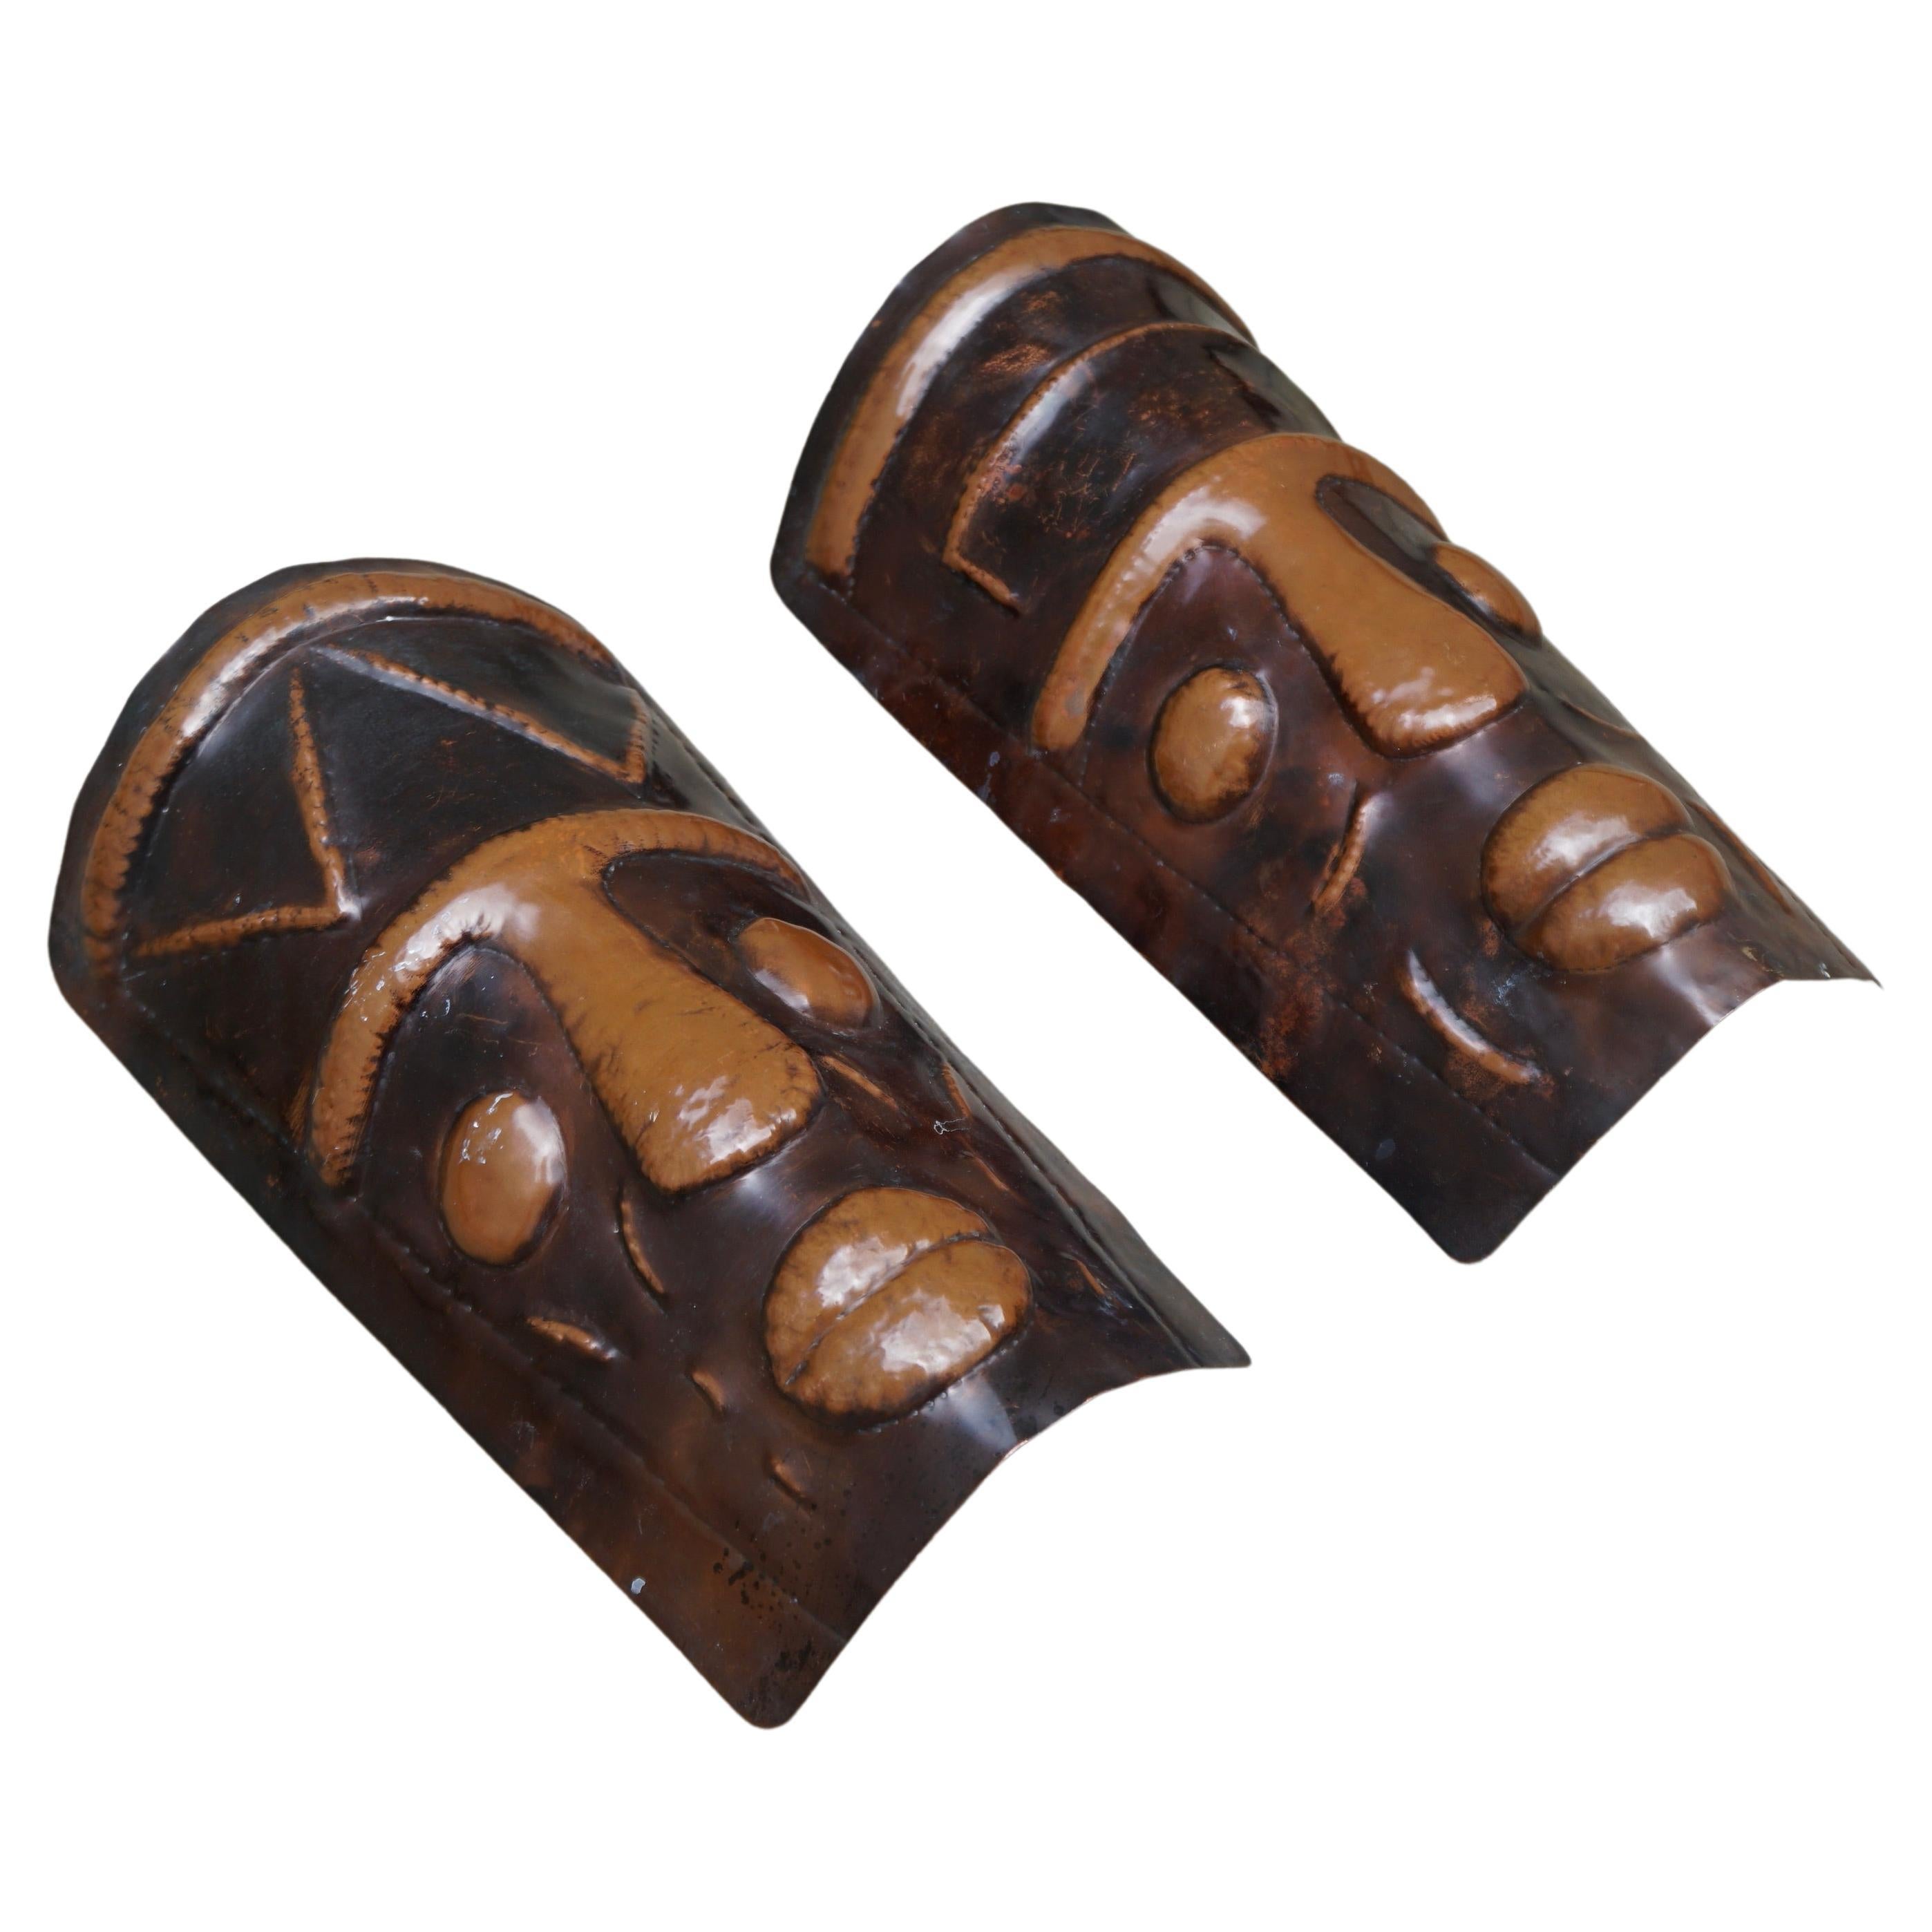 Set of two beautiful copper wall lamps sconces in the shape of African masks.
Belgium, 1950s.

Height 11.8